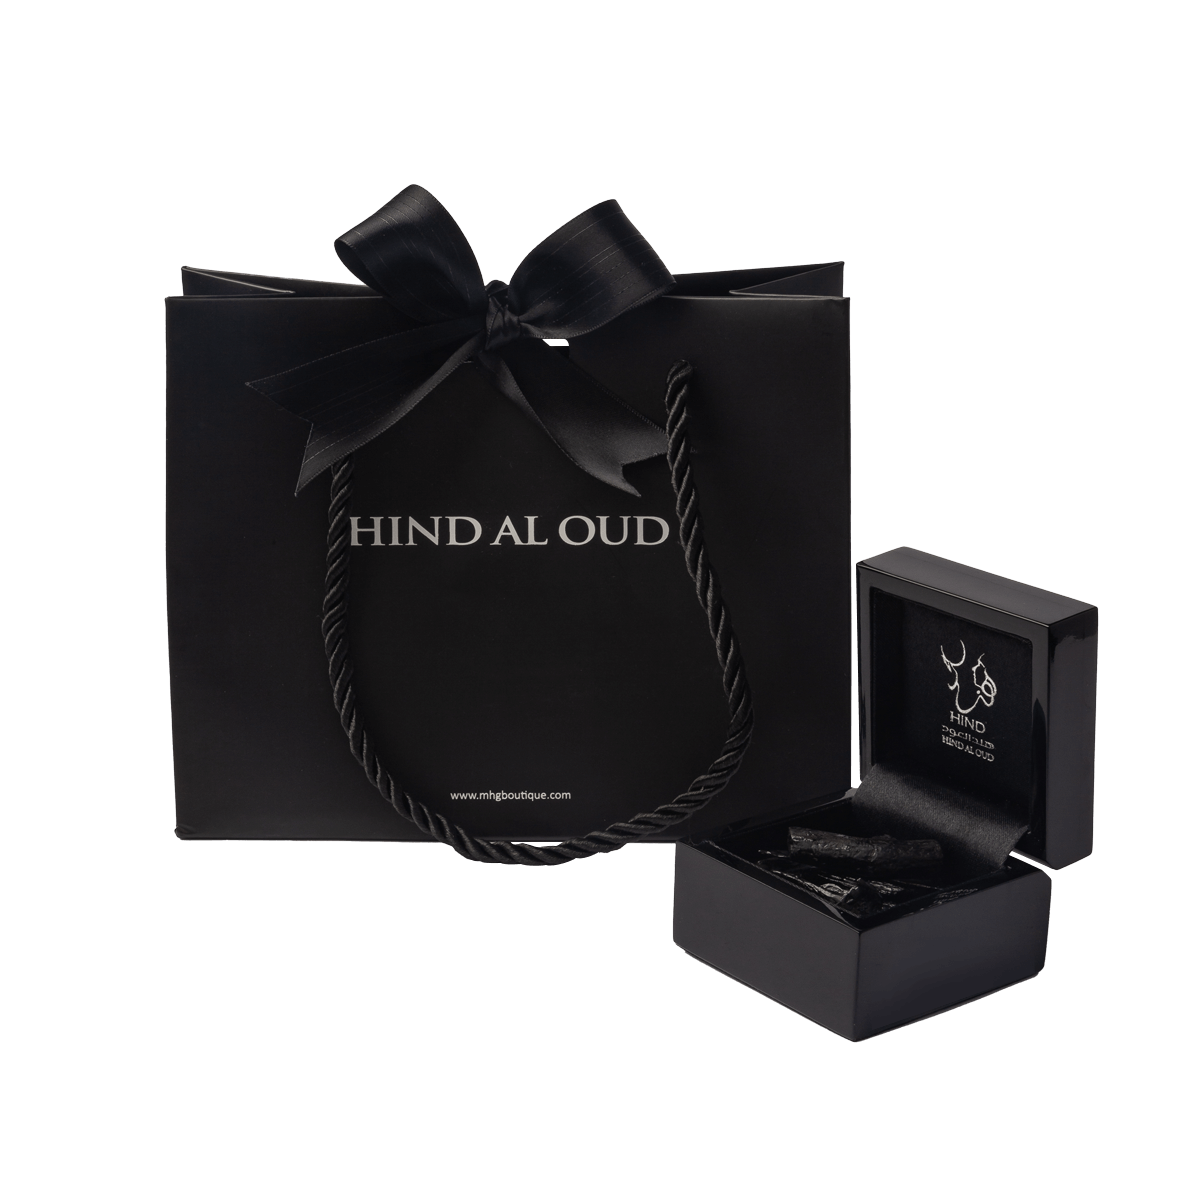 Hind Al Oud Goodie Bag - Ahojas (10g) - Hind Al Oud - MHGboutique - perfumes - fragrances - oud - online shopping - free shipping - top perfumes - best perfumes